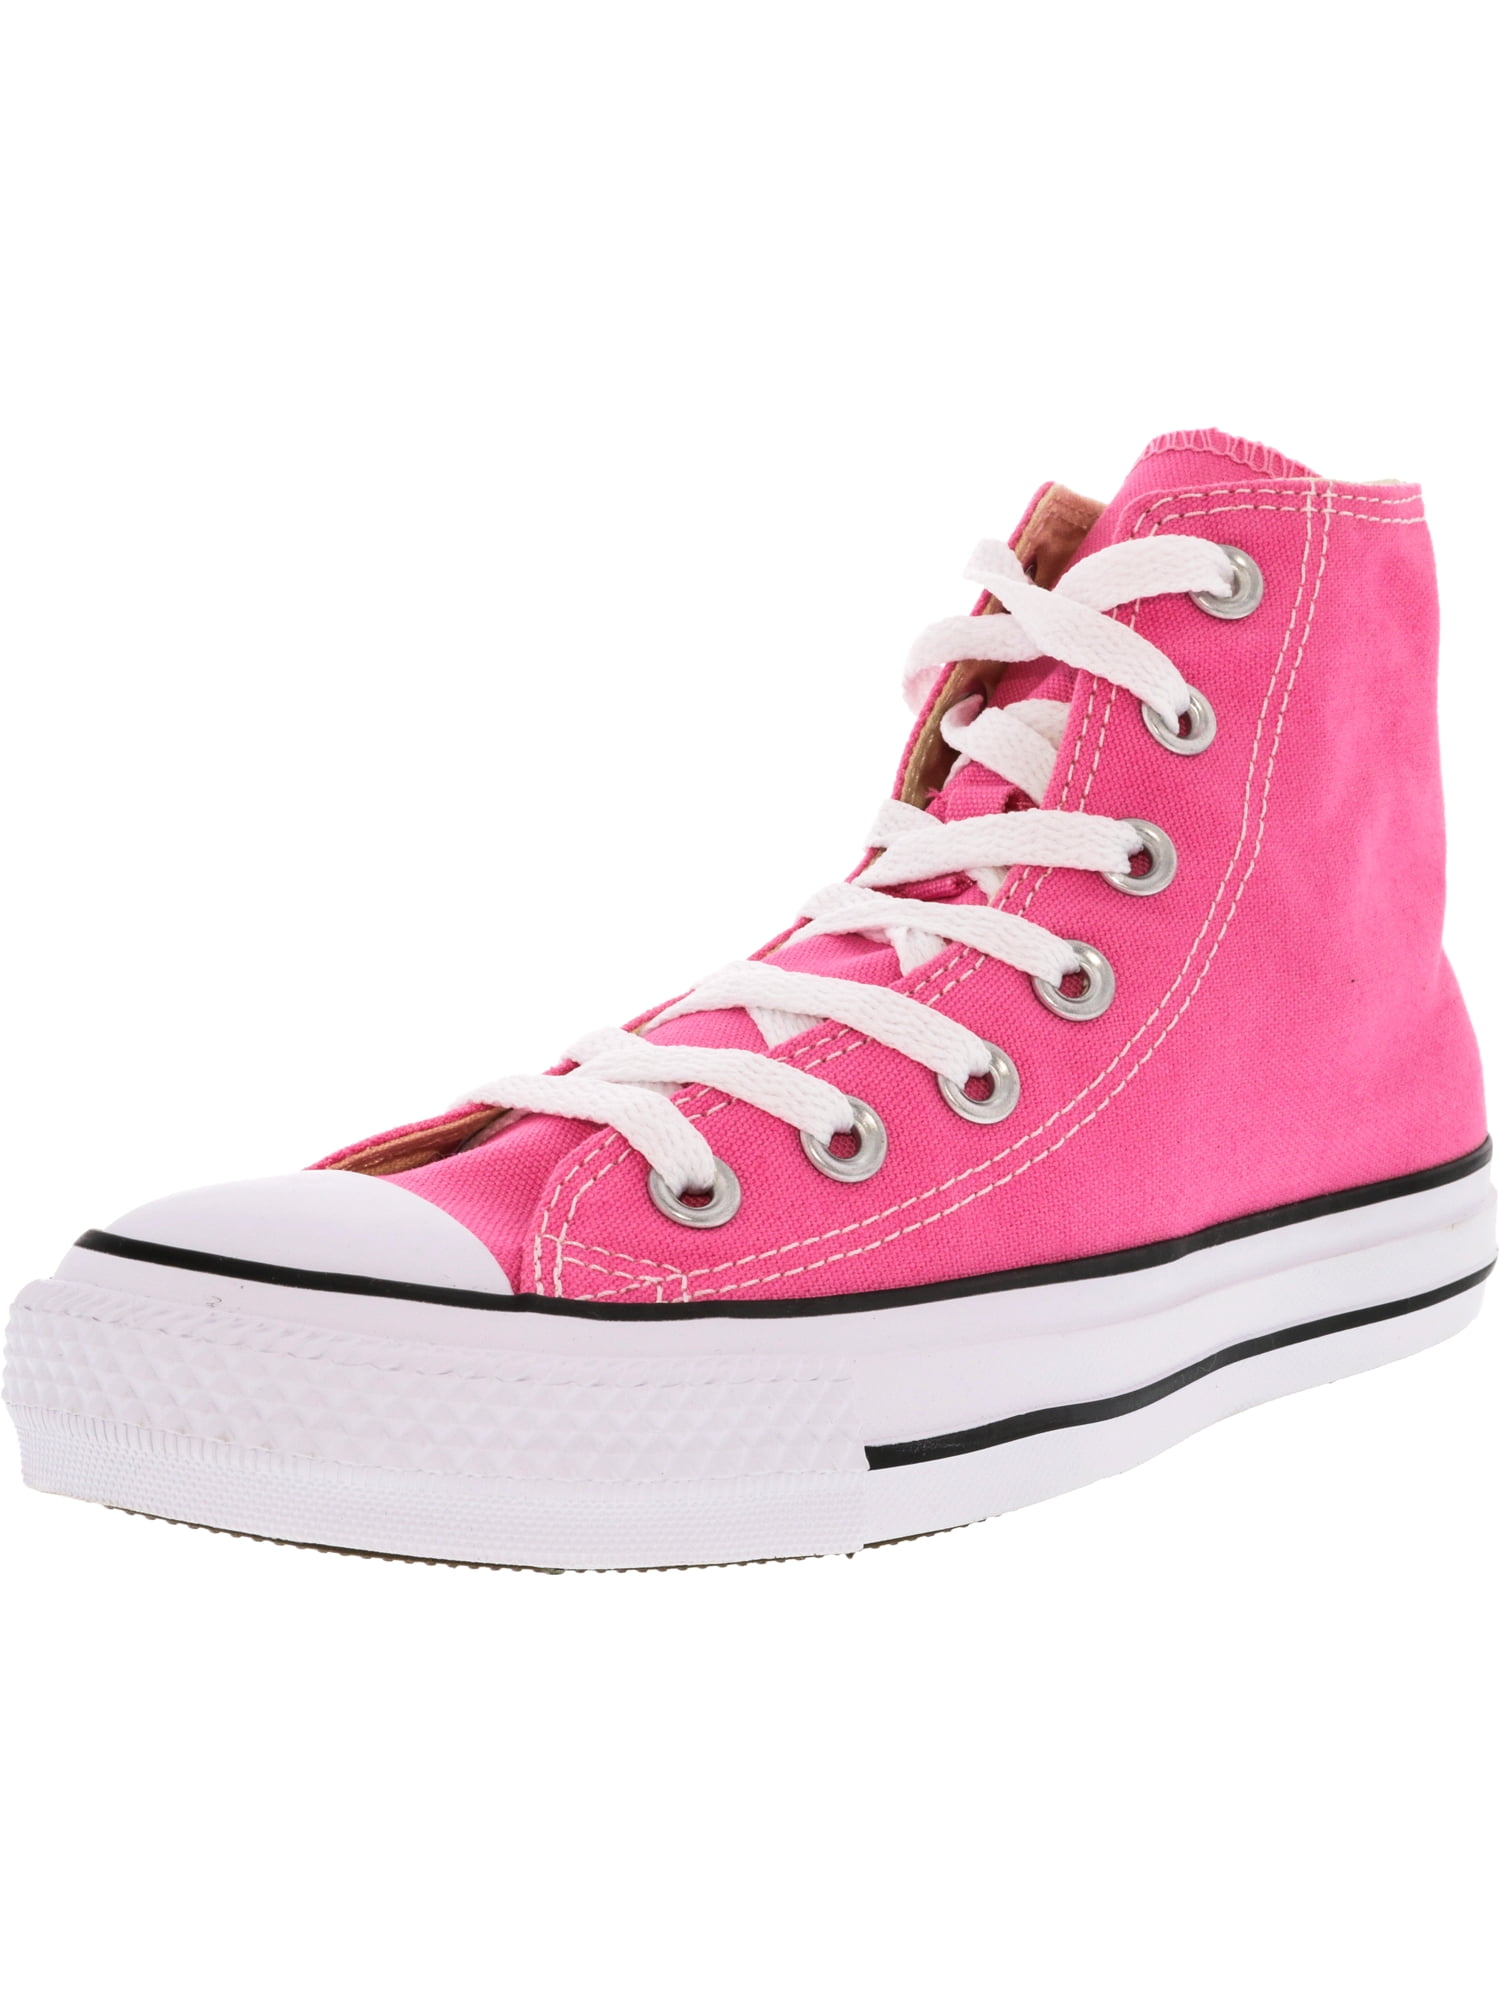 bright pink converse high tops